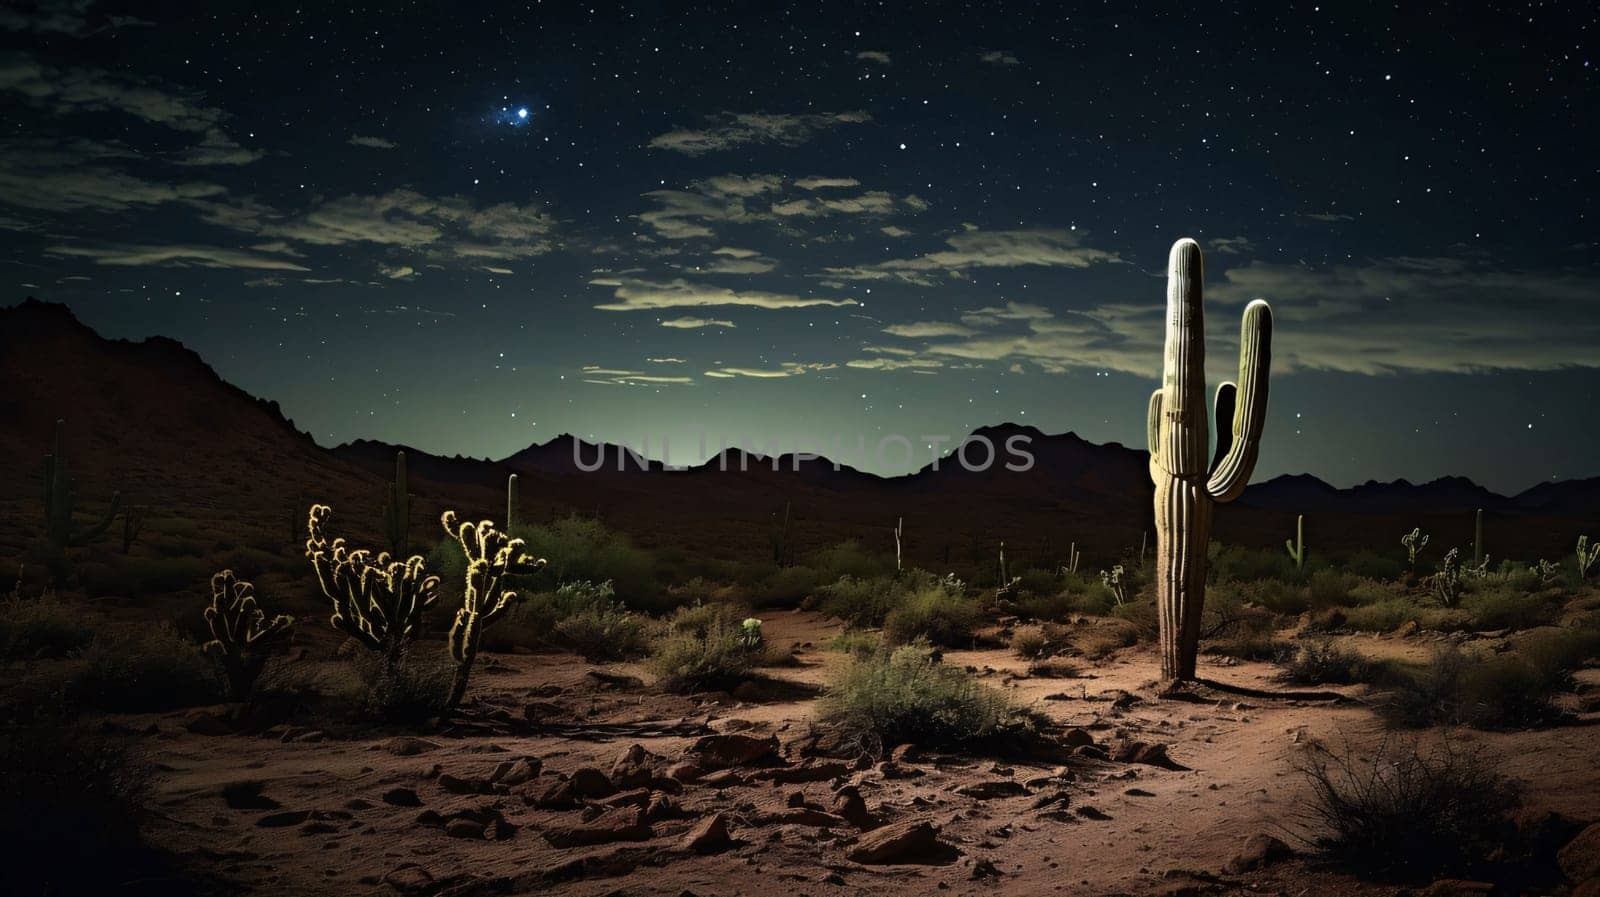 Plant called Cactus: cacti in the desert at night with starry sky.